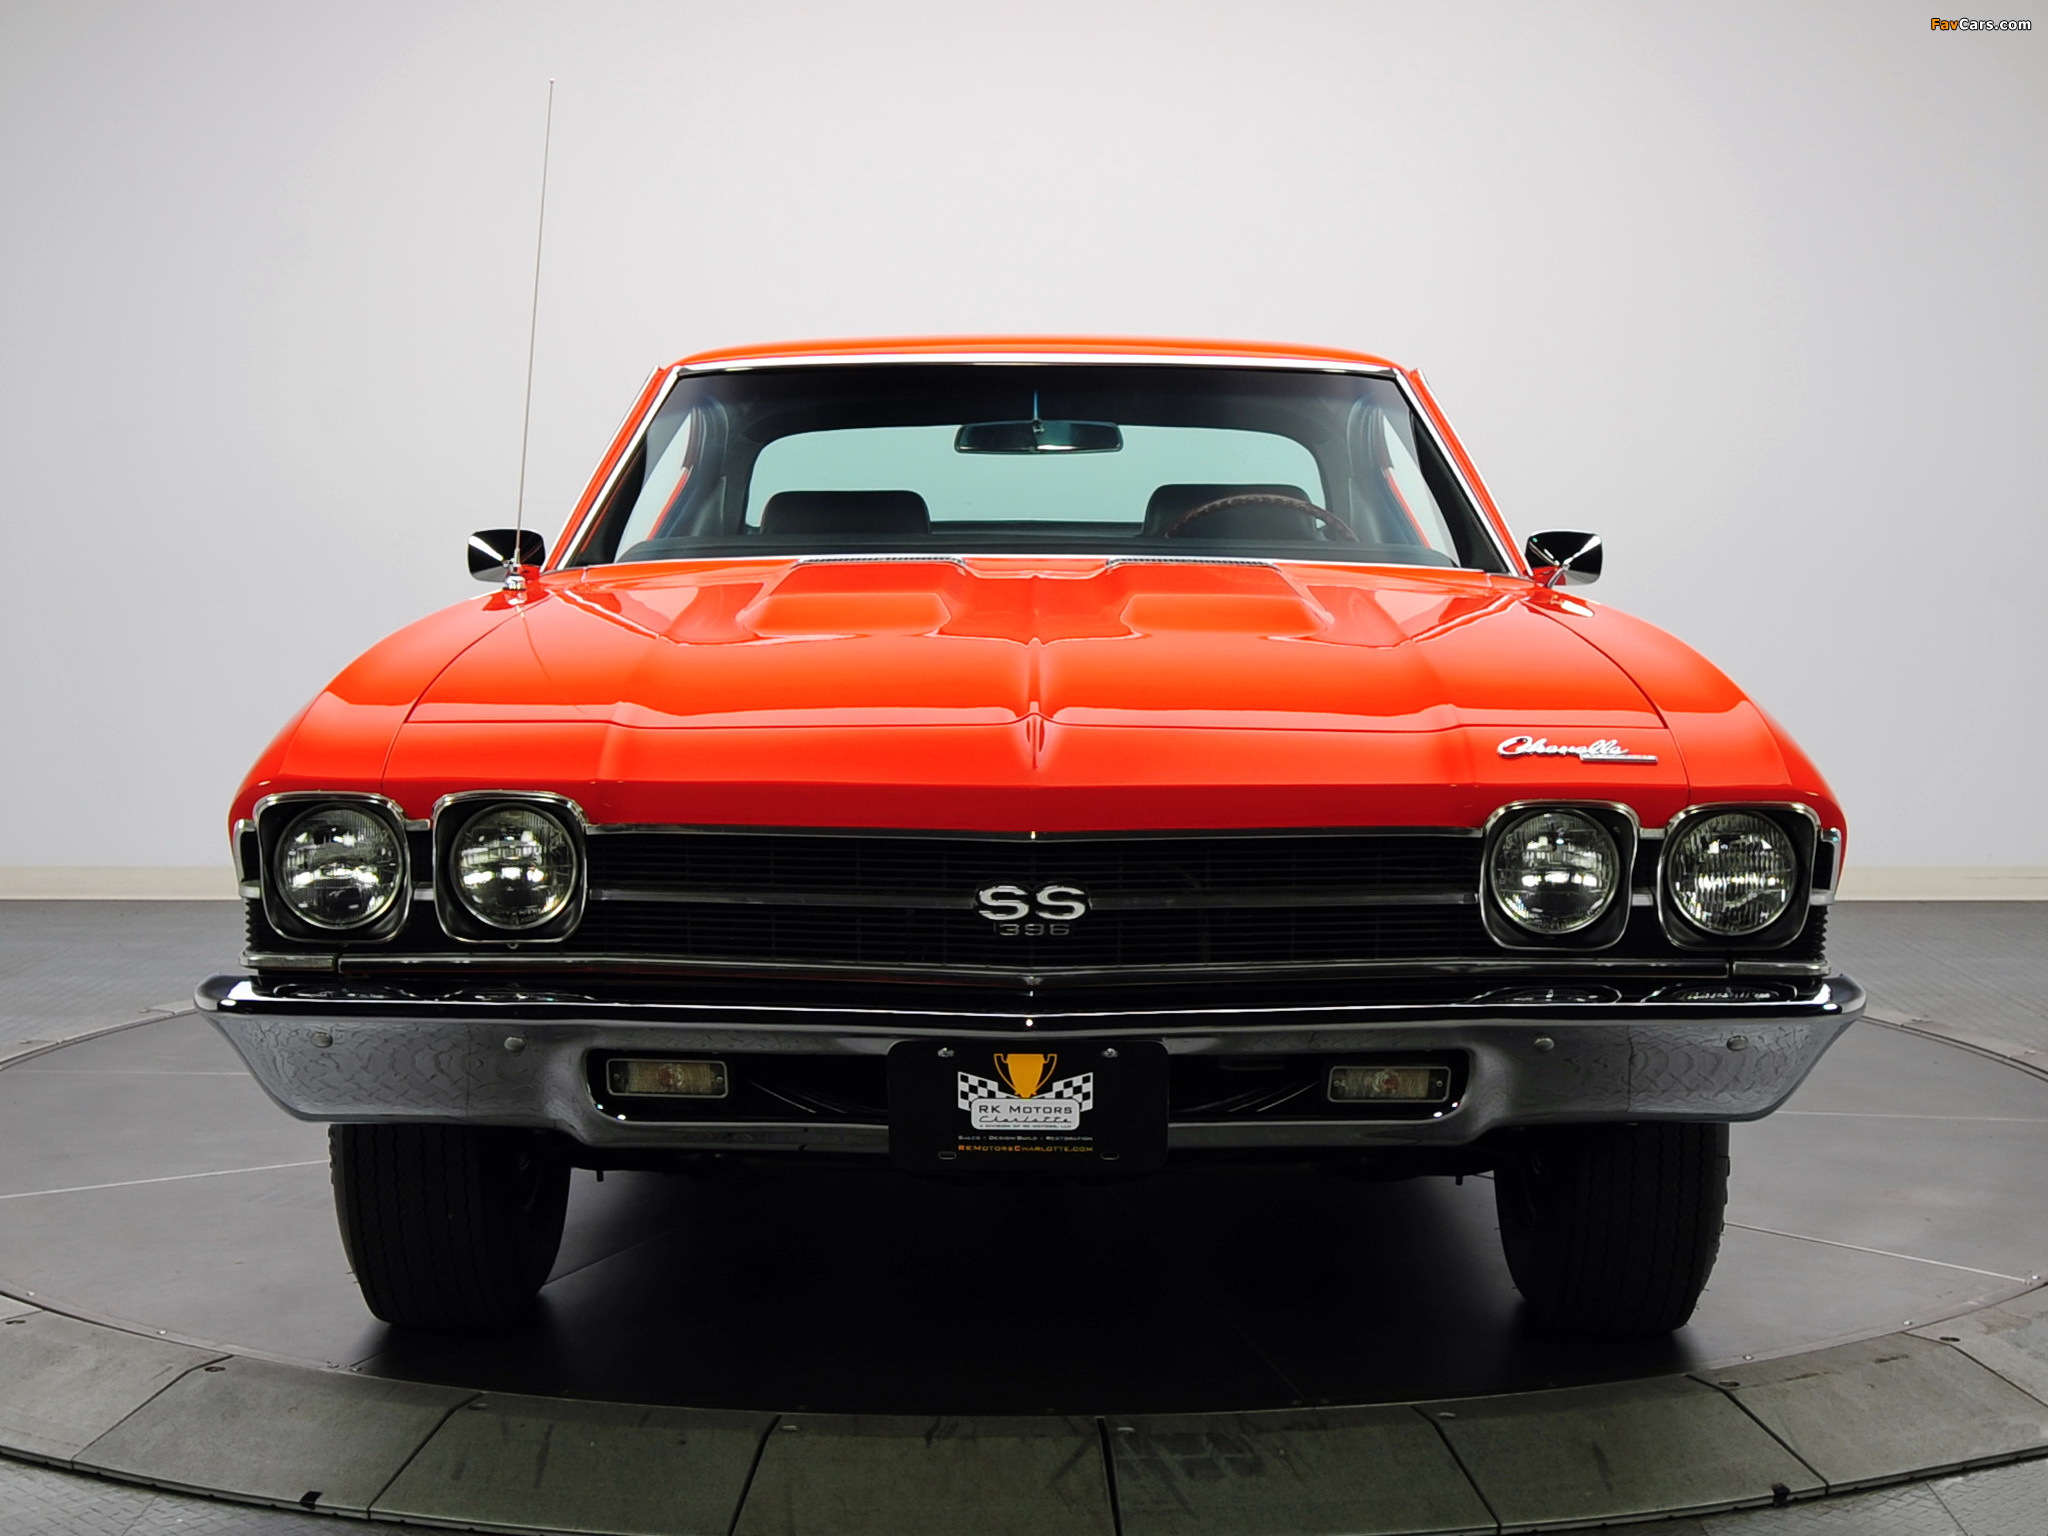 Chevrolet Chevelle SS 396 L34 Hardtop Coupe 1969 wallpapers 2048x1536 2048x1536